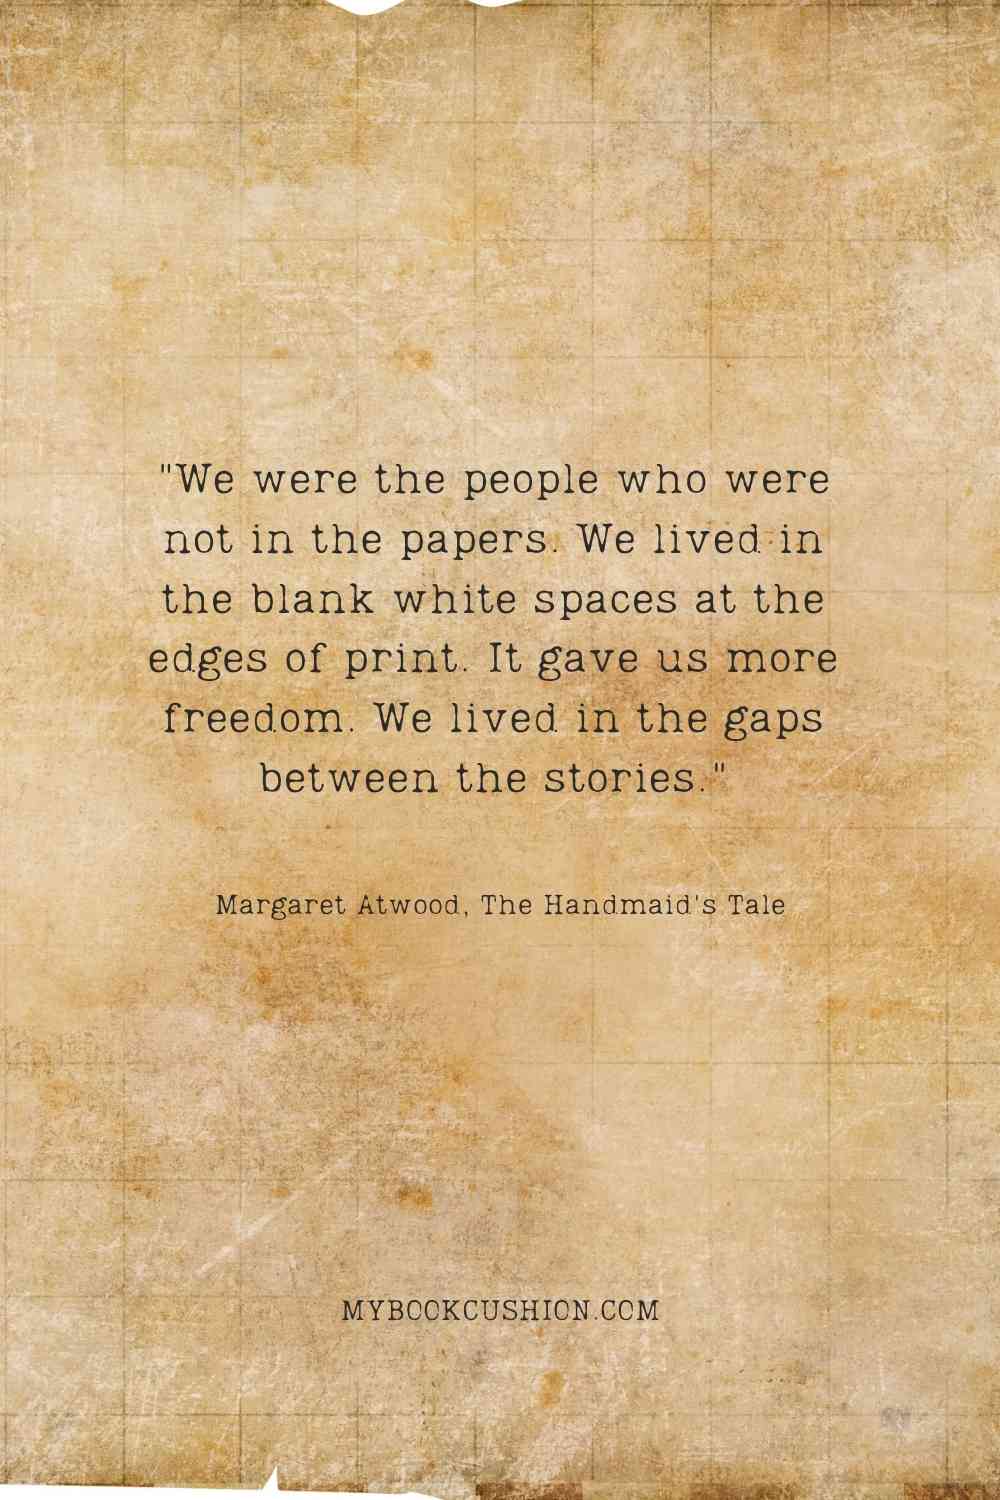 "We were the people who were not in the papers. We lived in the blank white spaces at the edges of print. It gave us more freedom. We lived in the gaps between the stories." -Margaret Atwood, The Handmaid's Tale